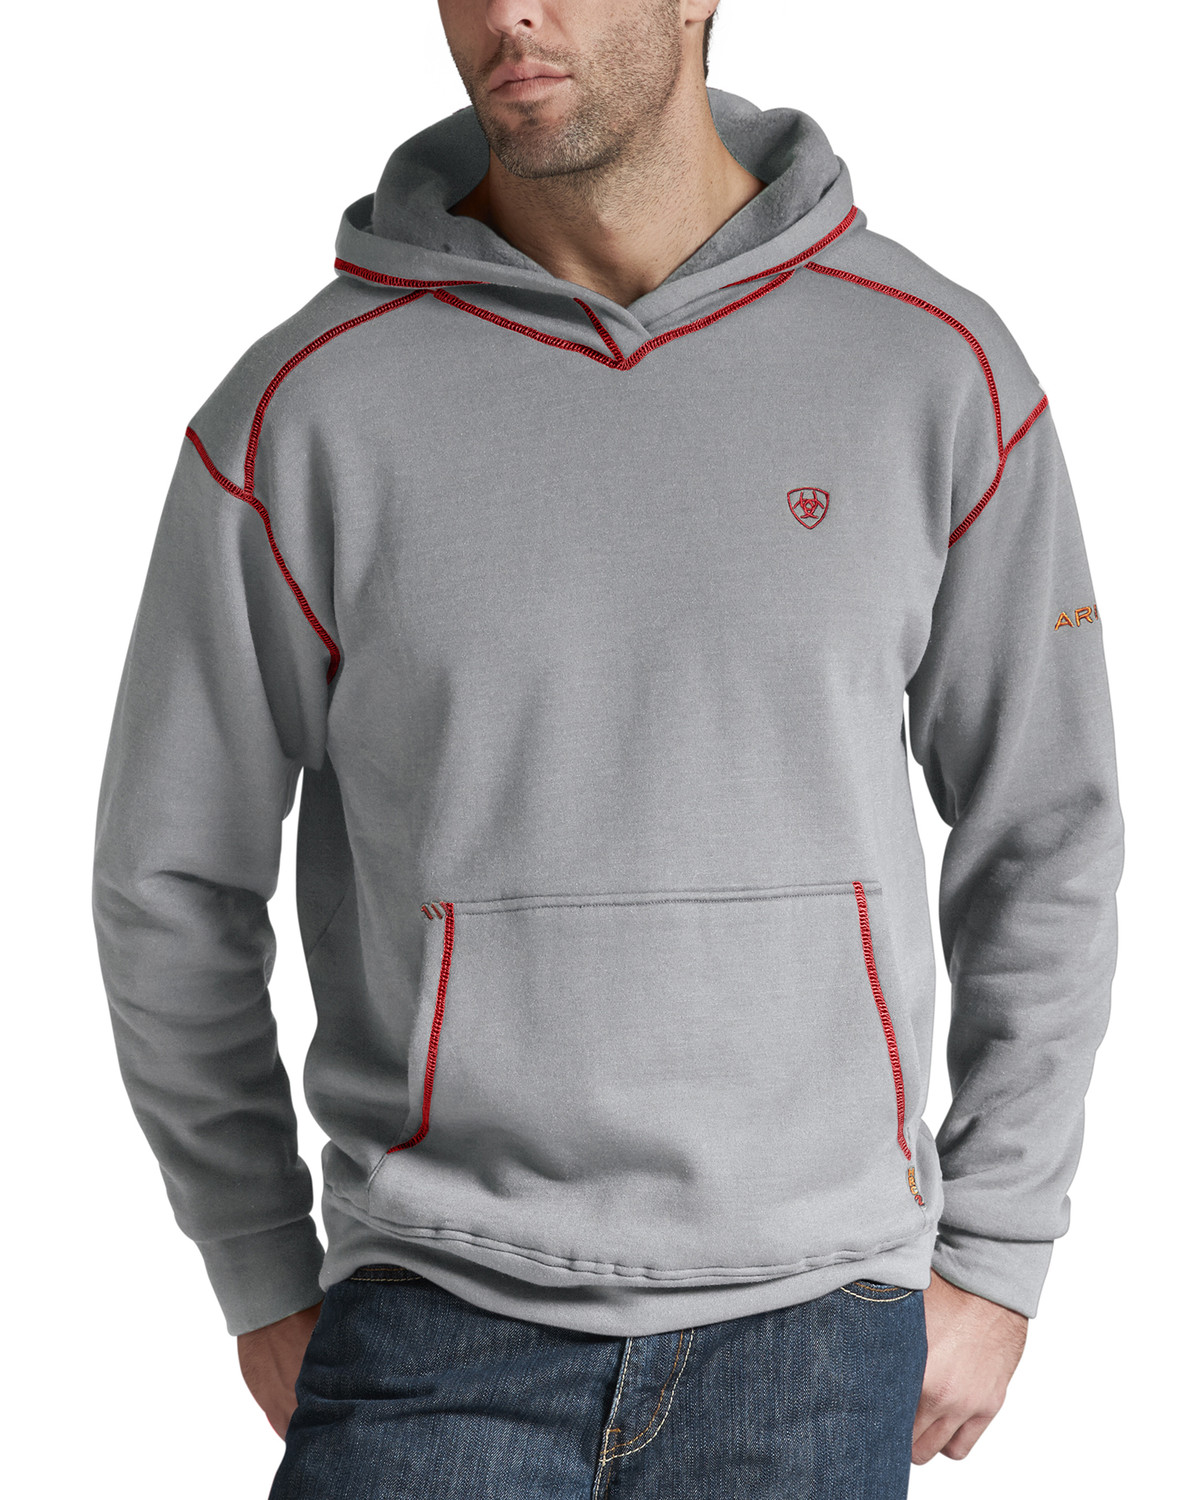 Ariat Flame Resistant Polartec Grey Hoodie - Big and Tall | Sheplers